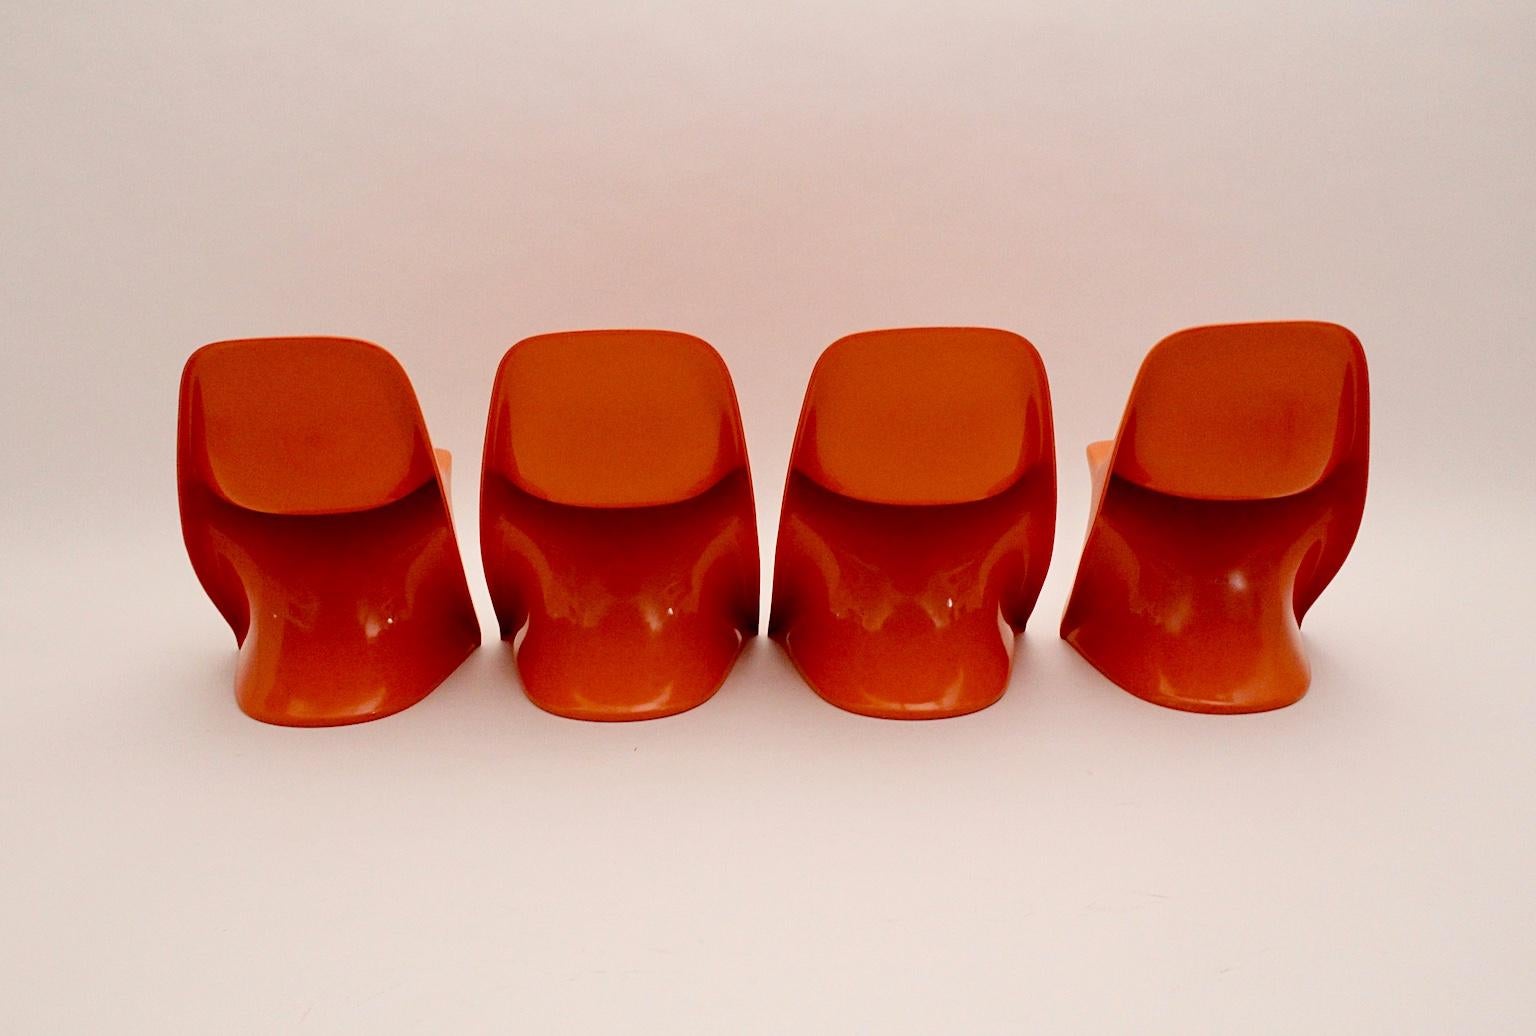 Space Age Plastic Four Vintage Orange Children Stacking Chairs 1970s Casalino For Sale 4